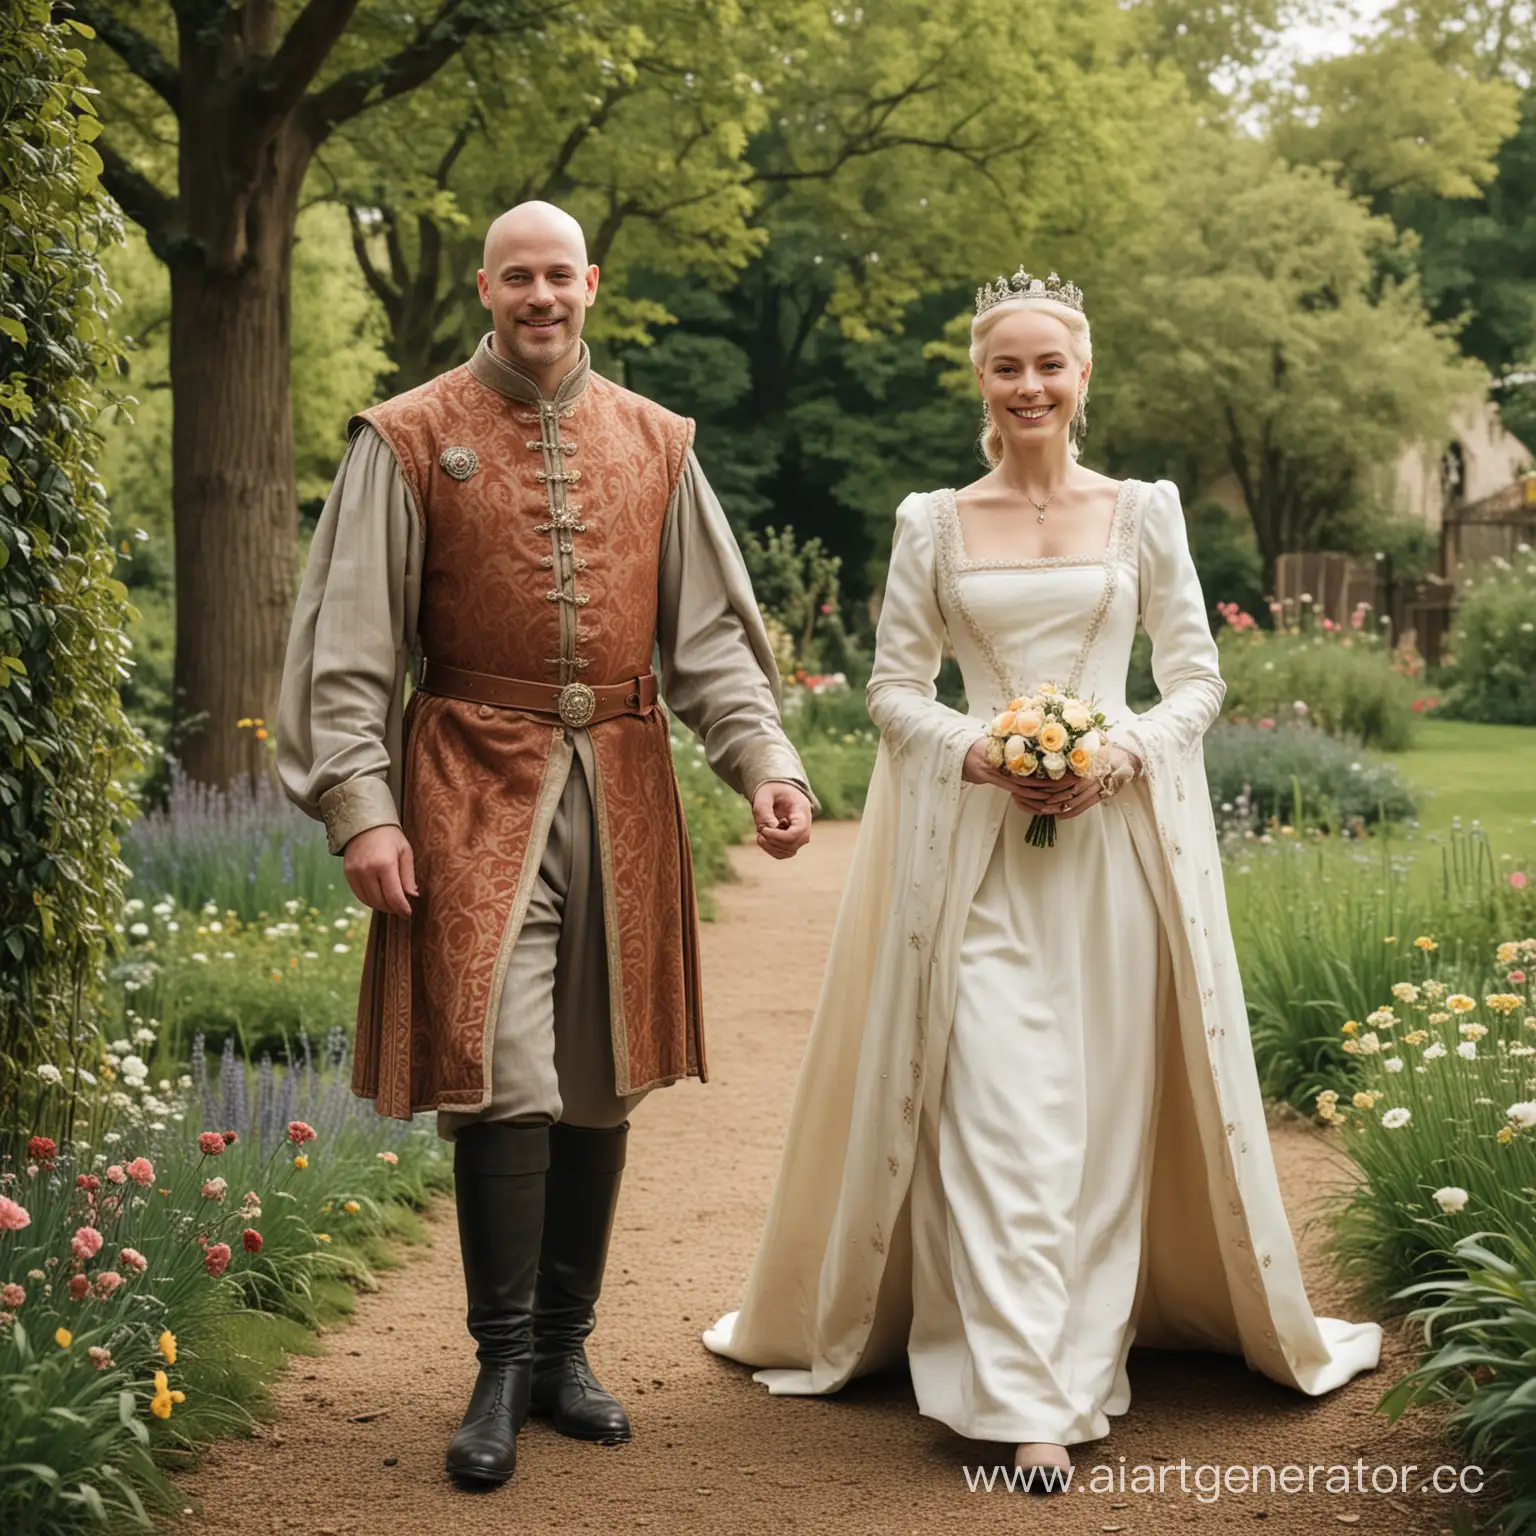 Royal-Couple-Strolling-Through-Medieval-Garden-King-and-Queen-Smiling